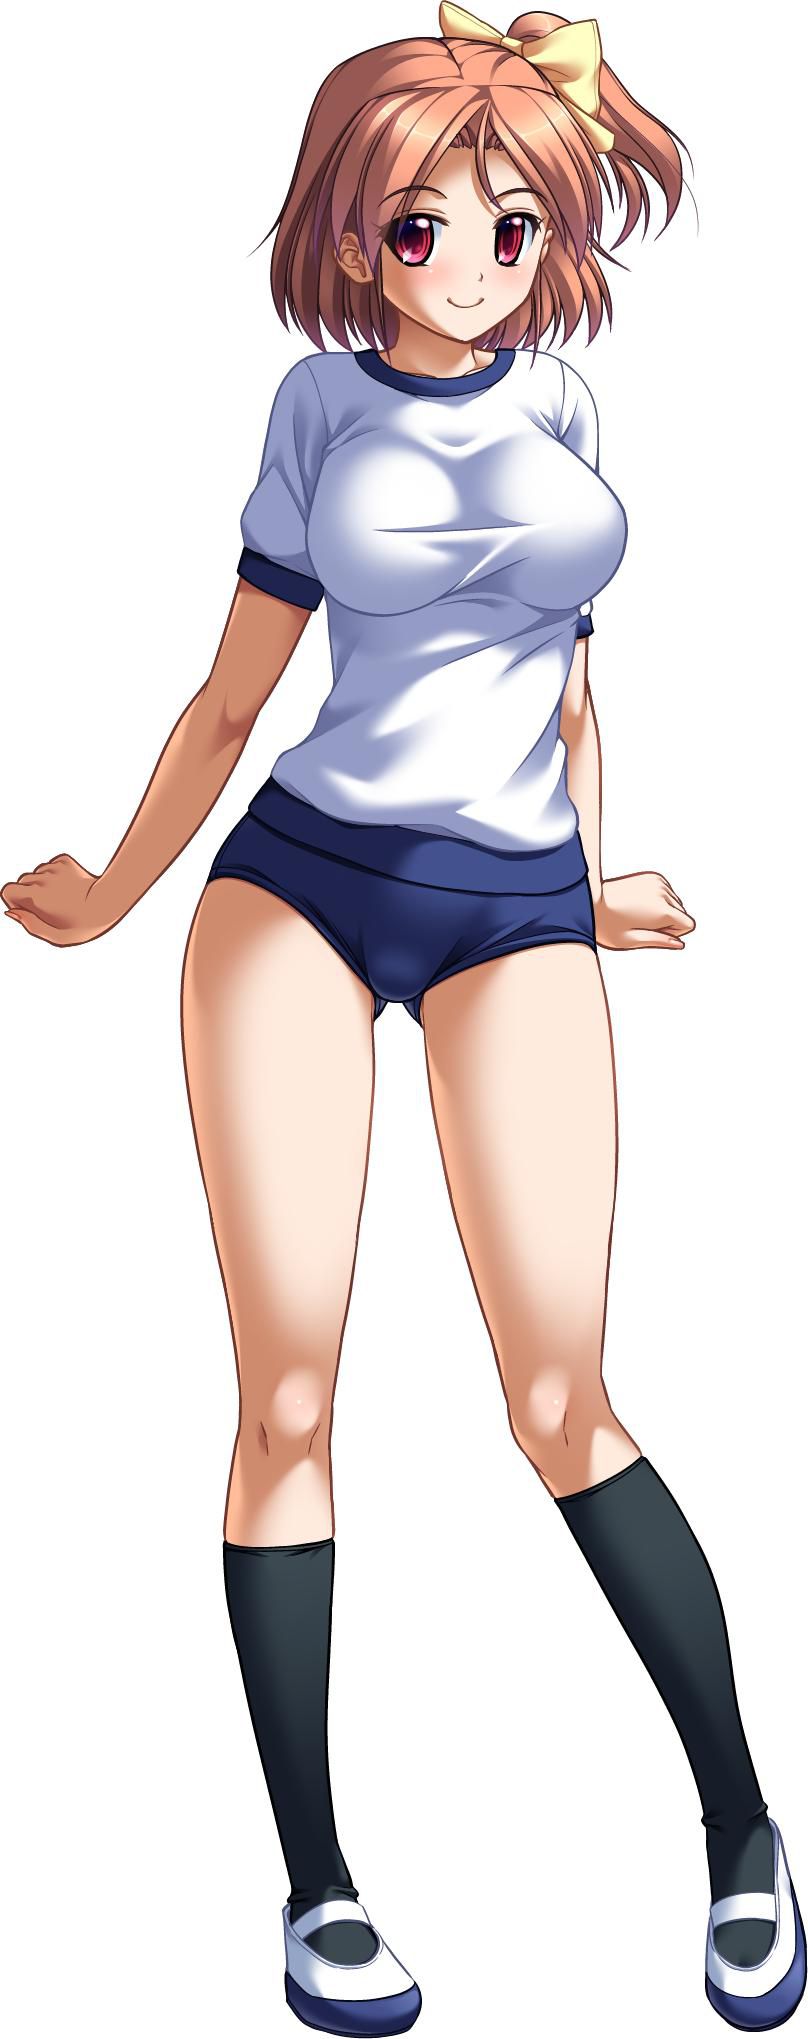 [some senses of incongruity] the second eroticism image which wear the top though is bloomers, a gym suit, and wear 38